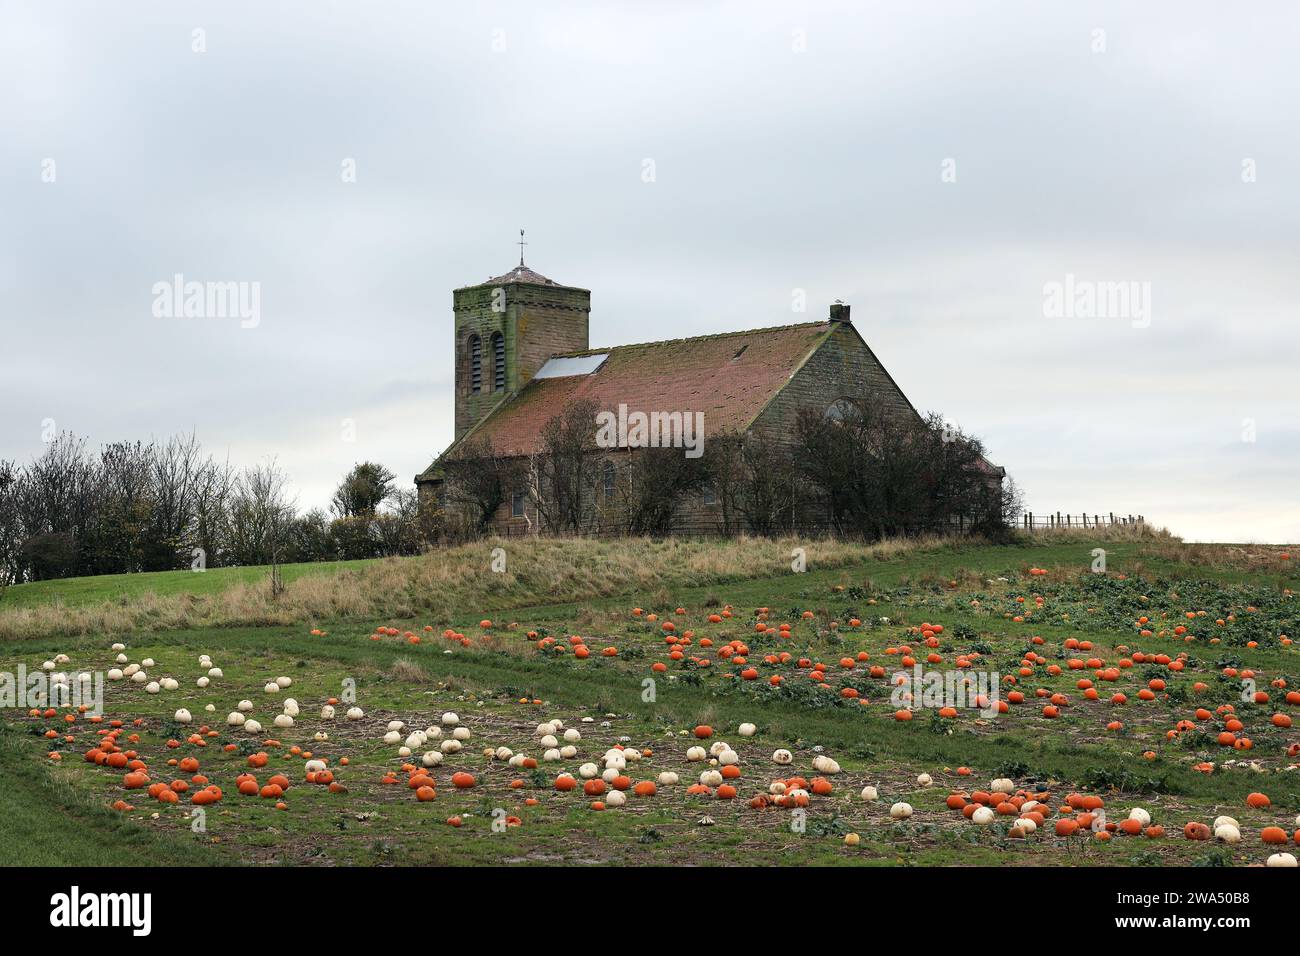 A Field of Pumpkins with a Storm Damaged St Abbs Parish Church in the Background, St Abbs, Scotland, UK Stock Photo